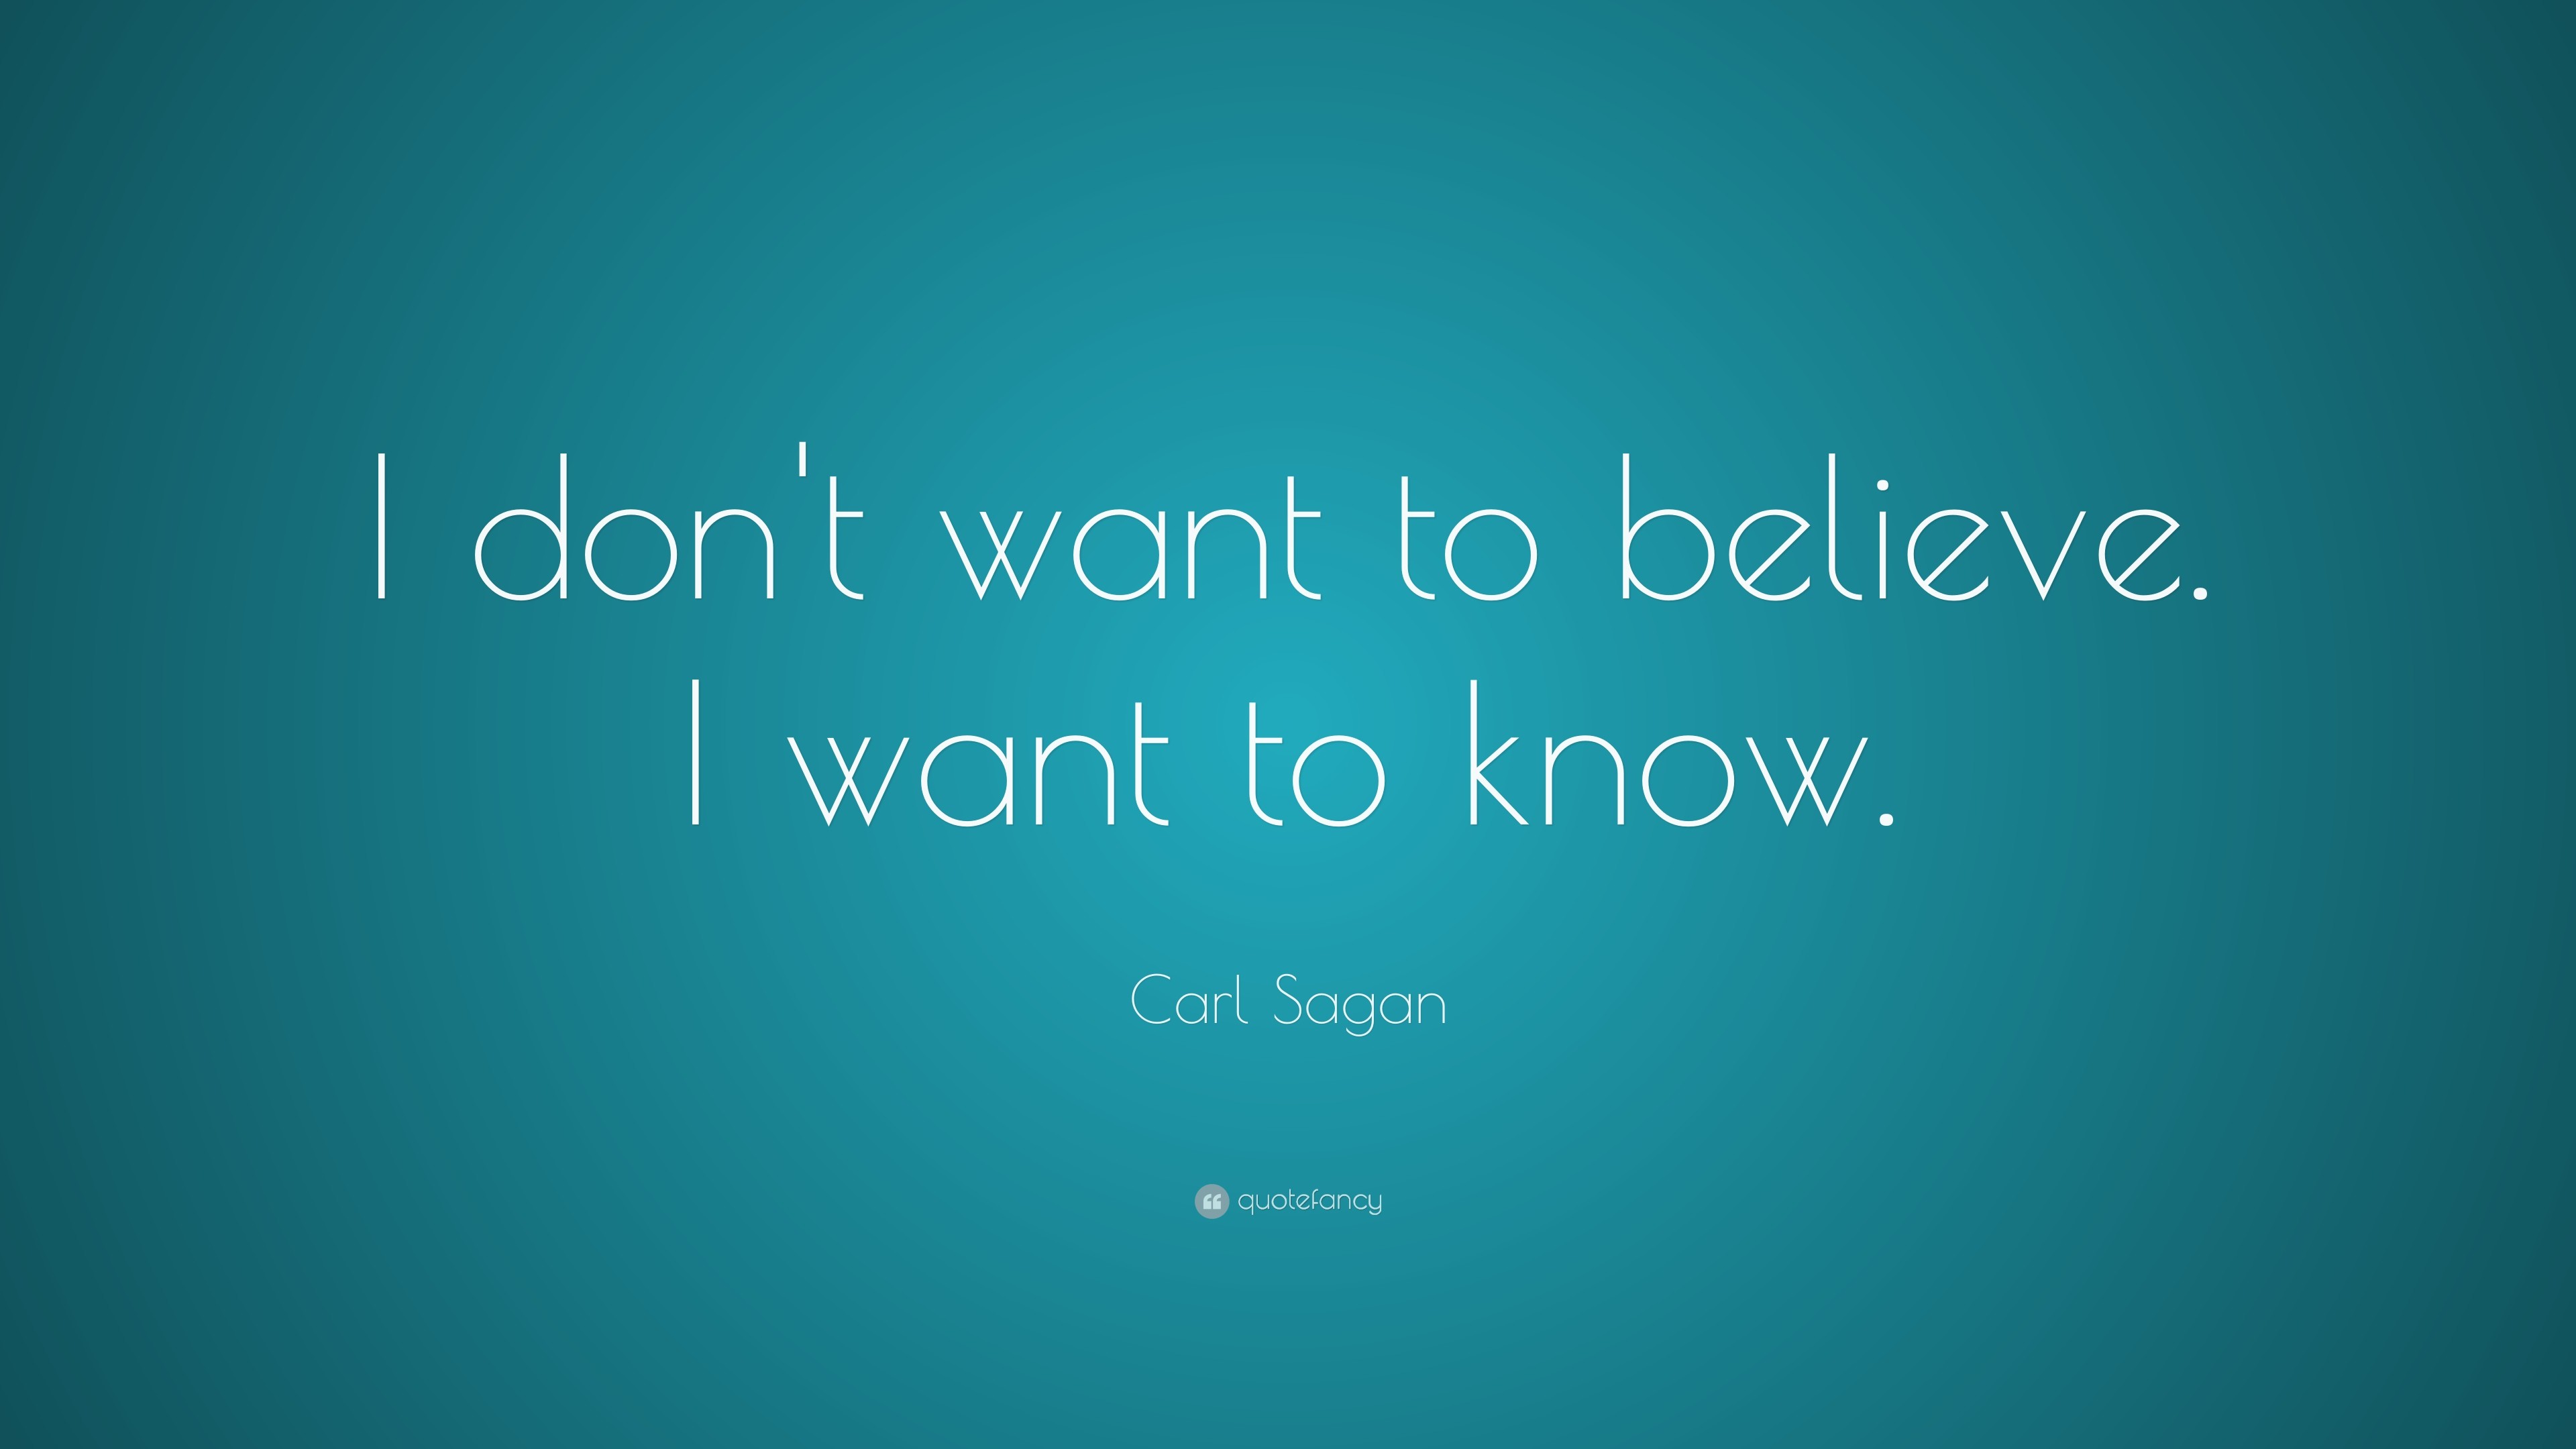 3840x2160 Carl Sagan Quote: “I don't want to believe. I want to know .